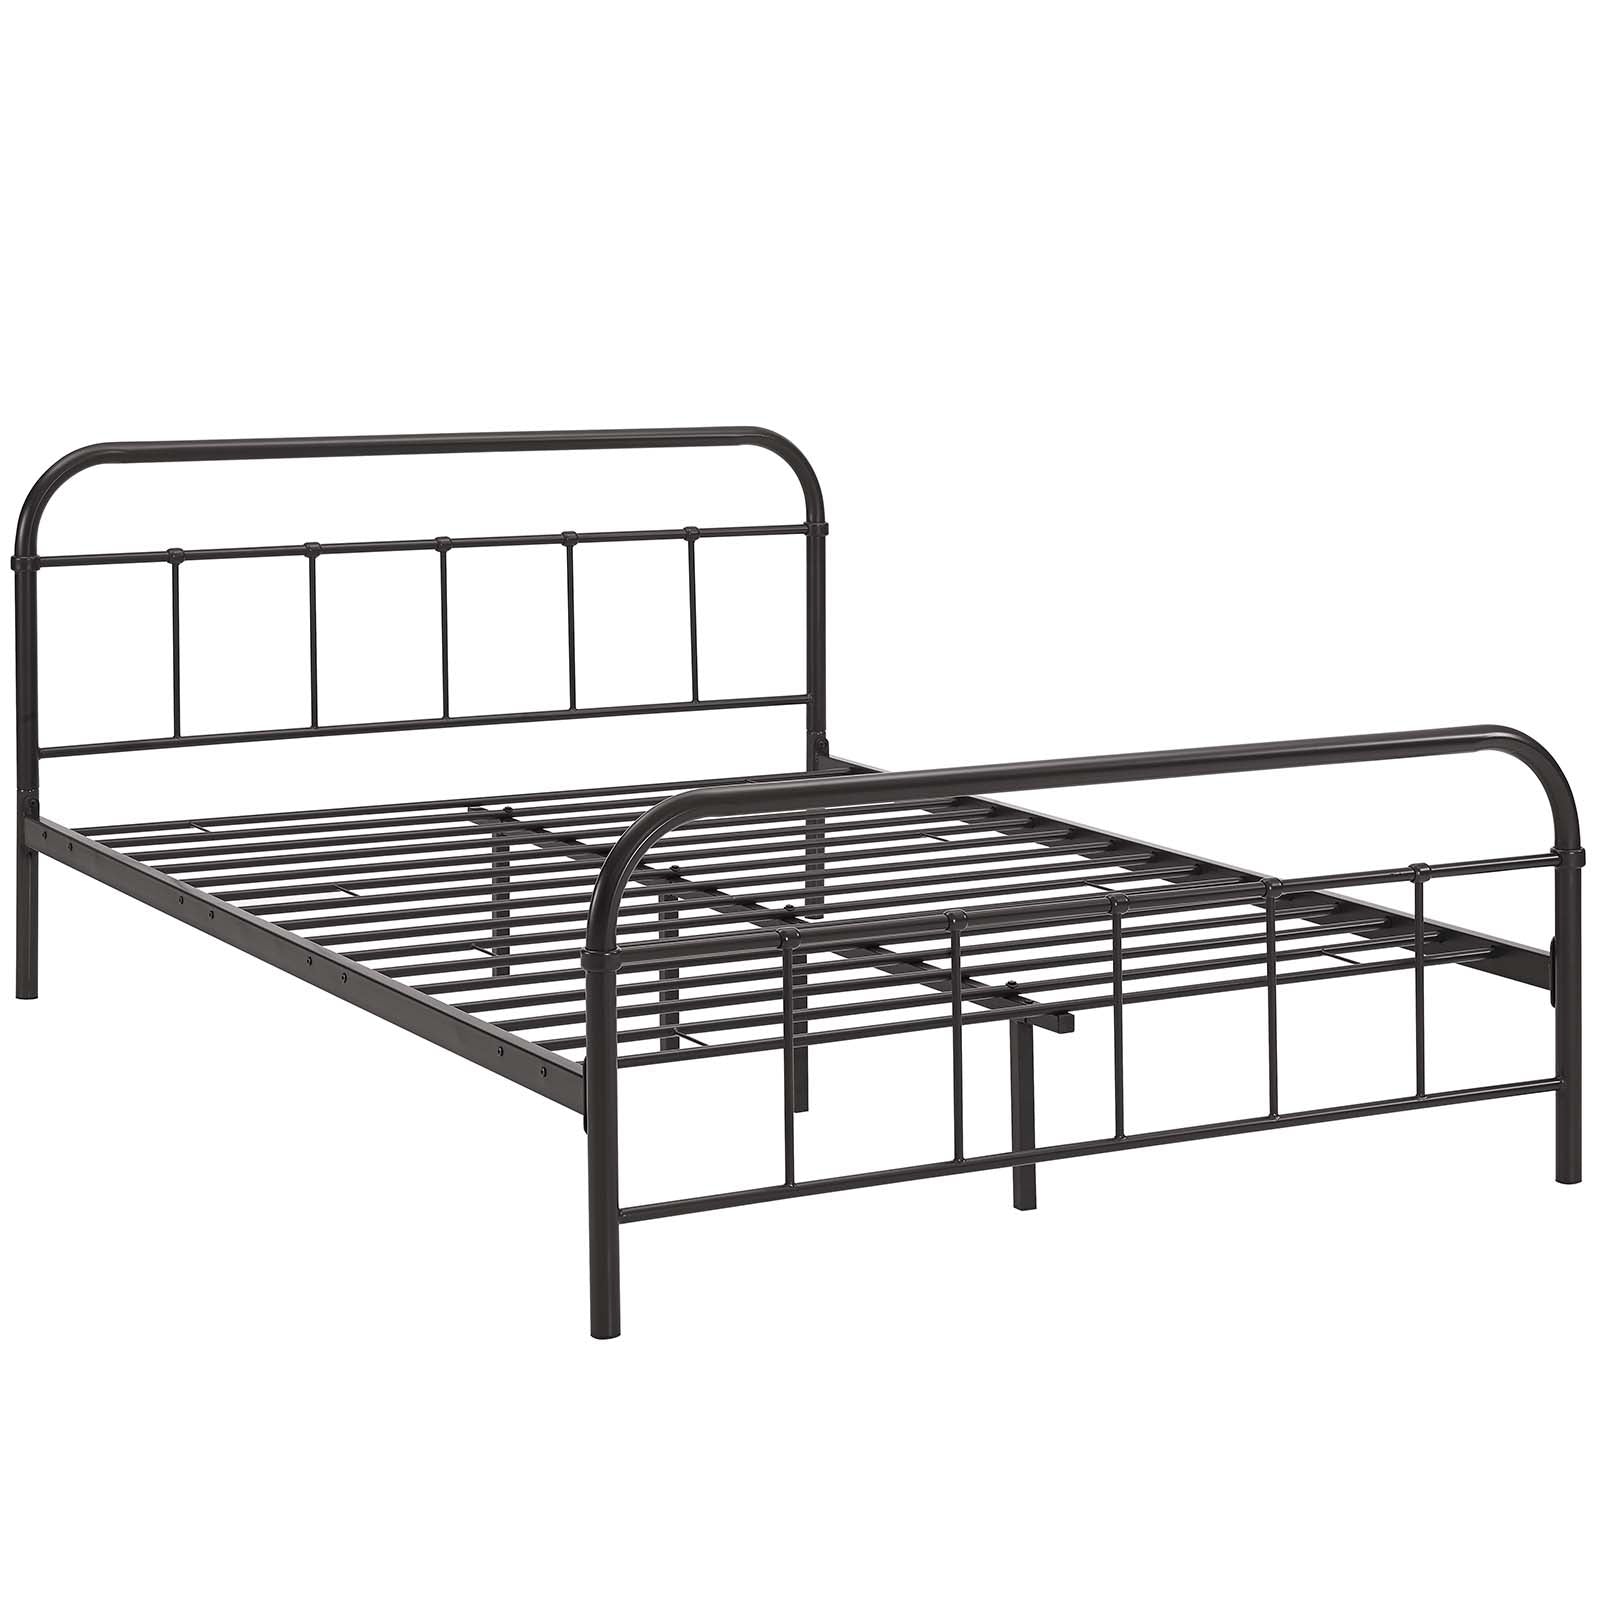 Modway Beds - Maisie Queen Stainless Steel Bed Frame Brown